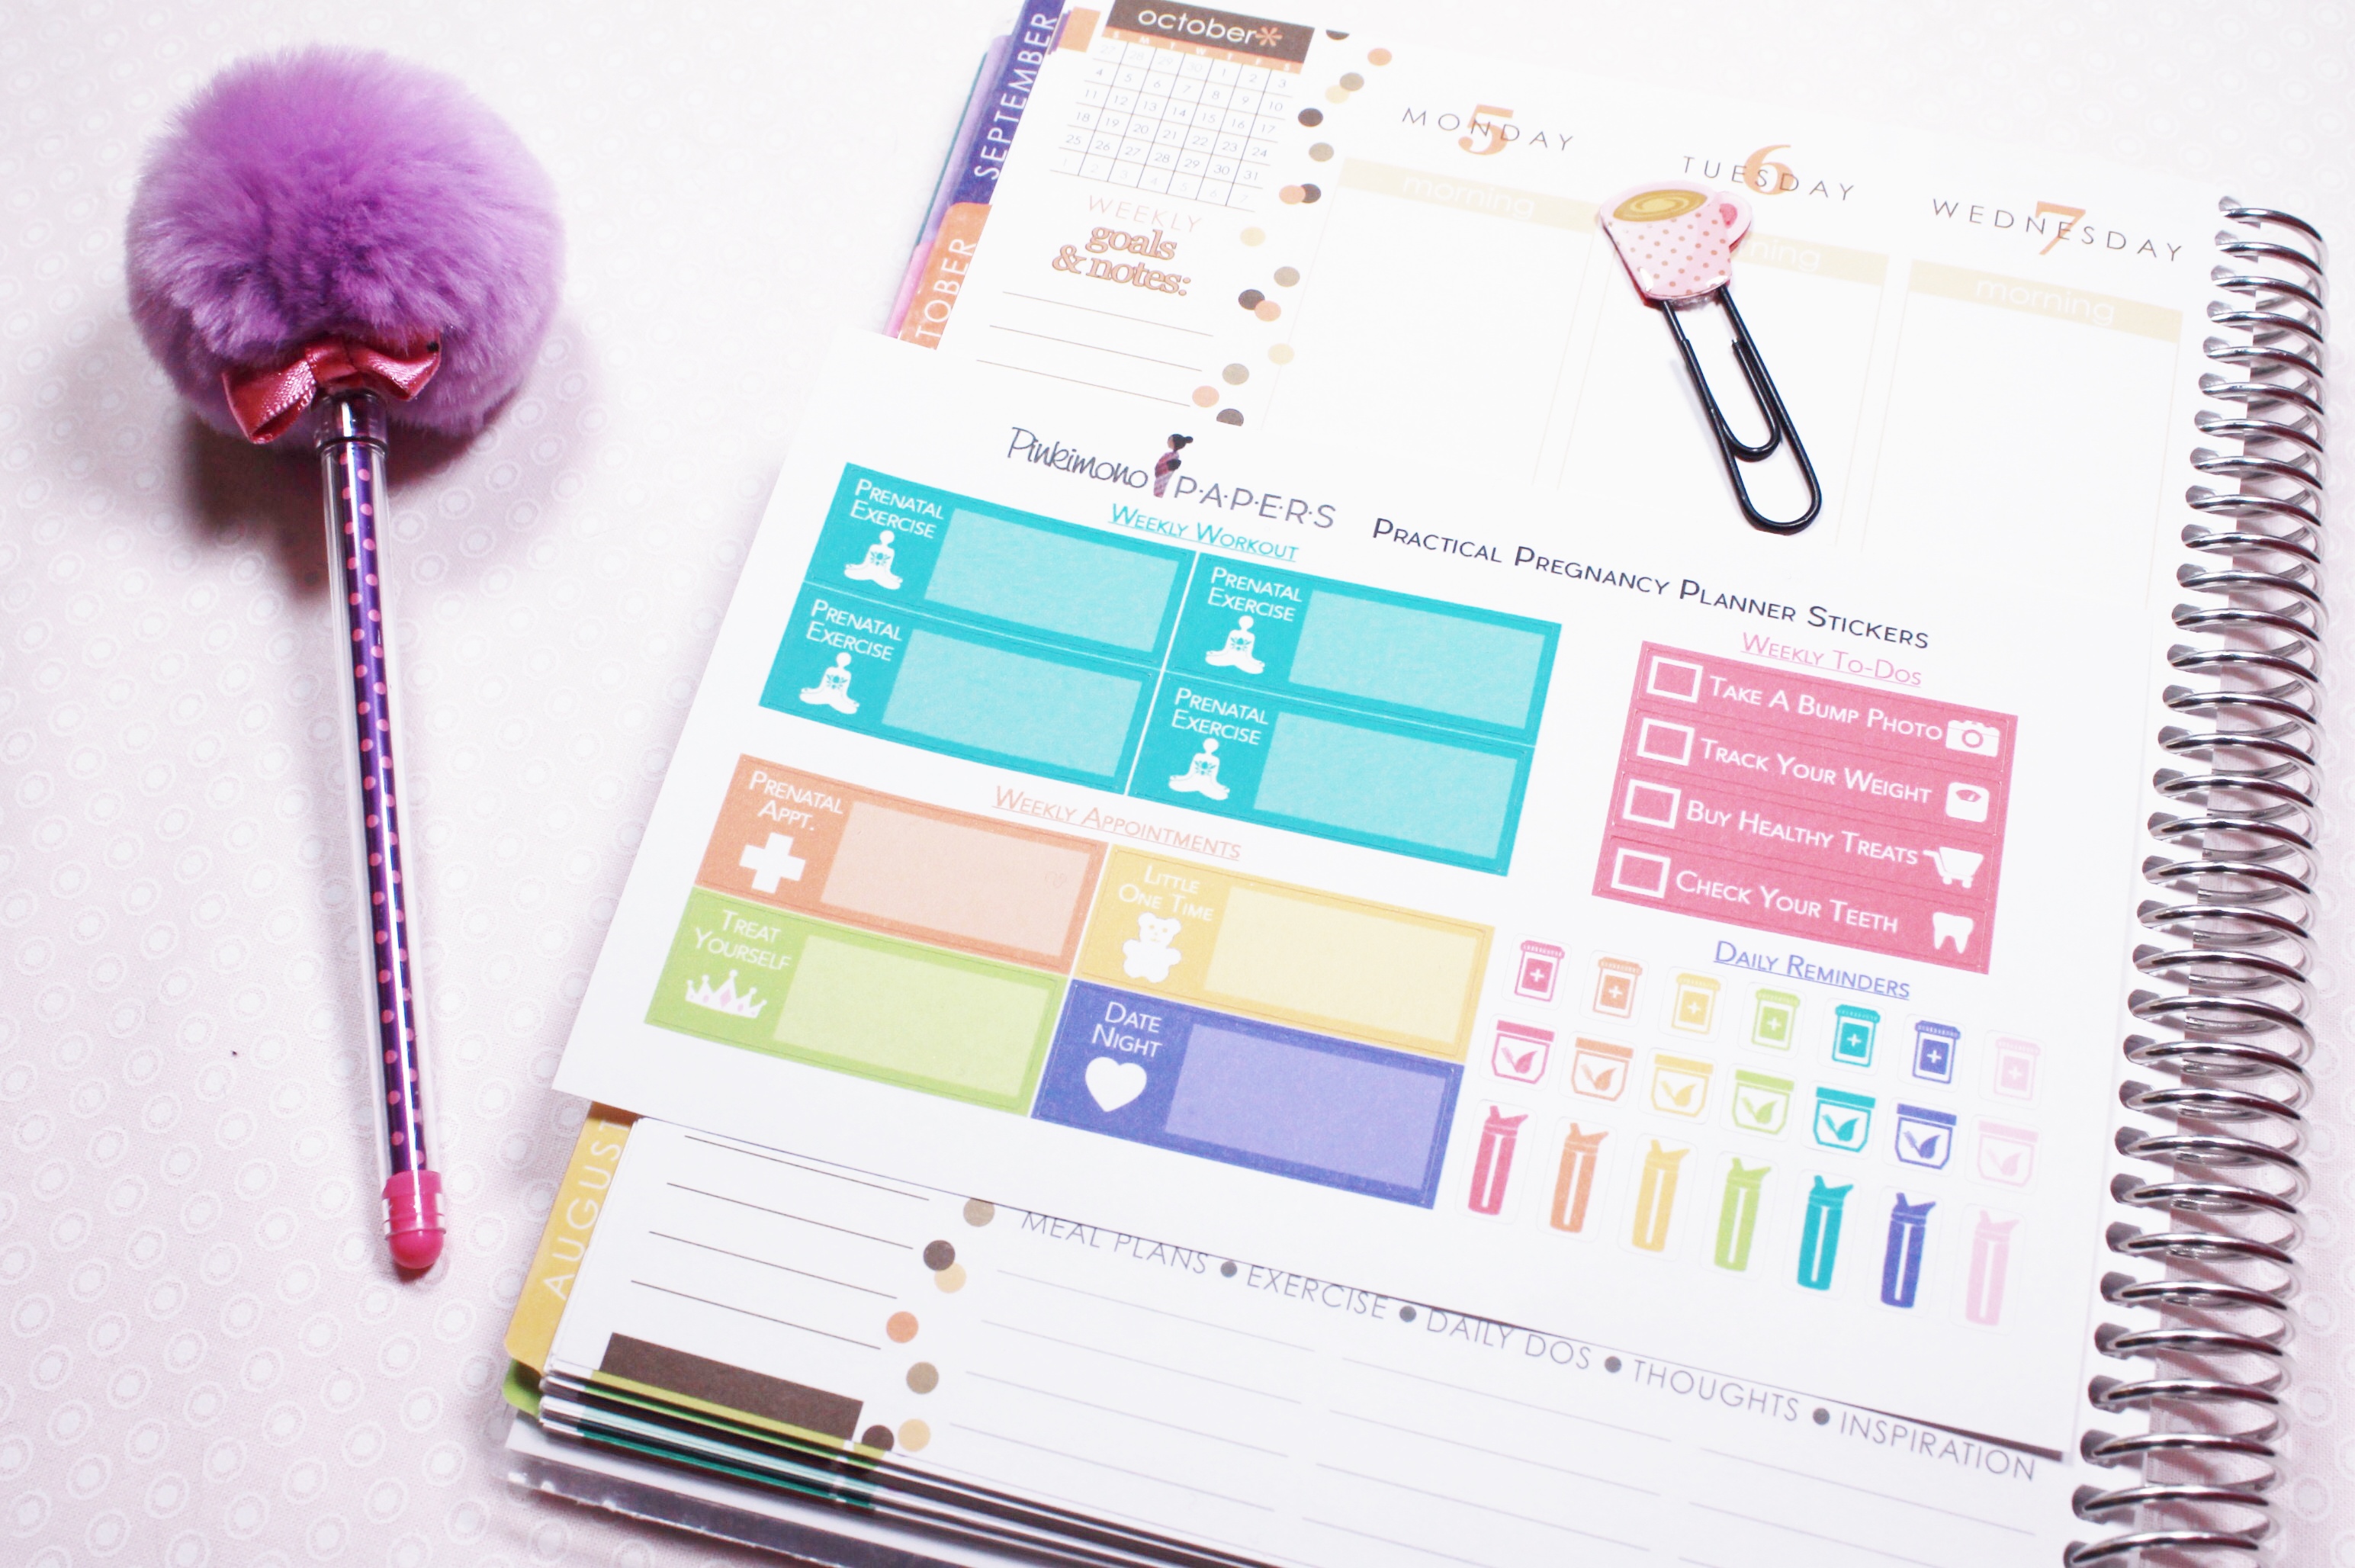 Limelife Planner with PinkimonoPapers Planner Stickers 2